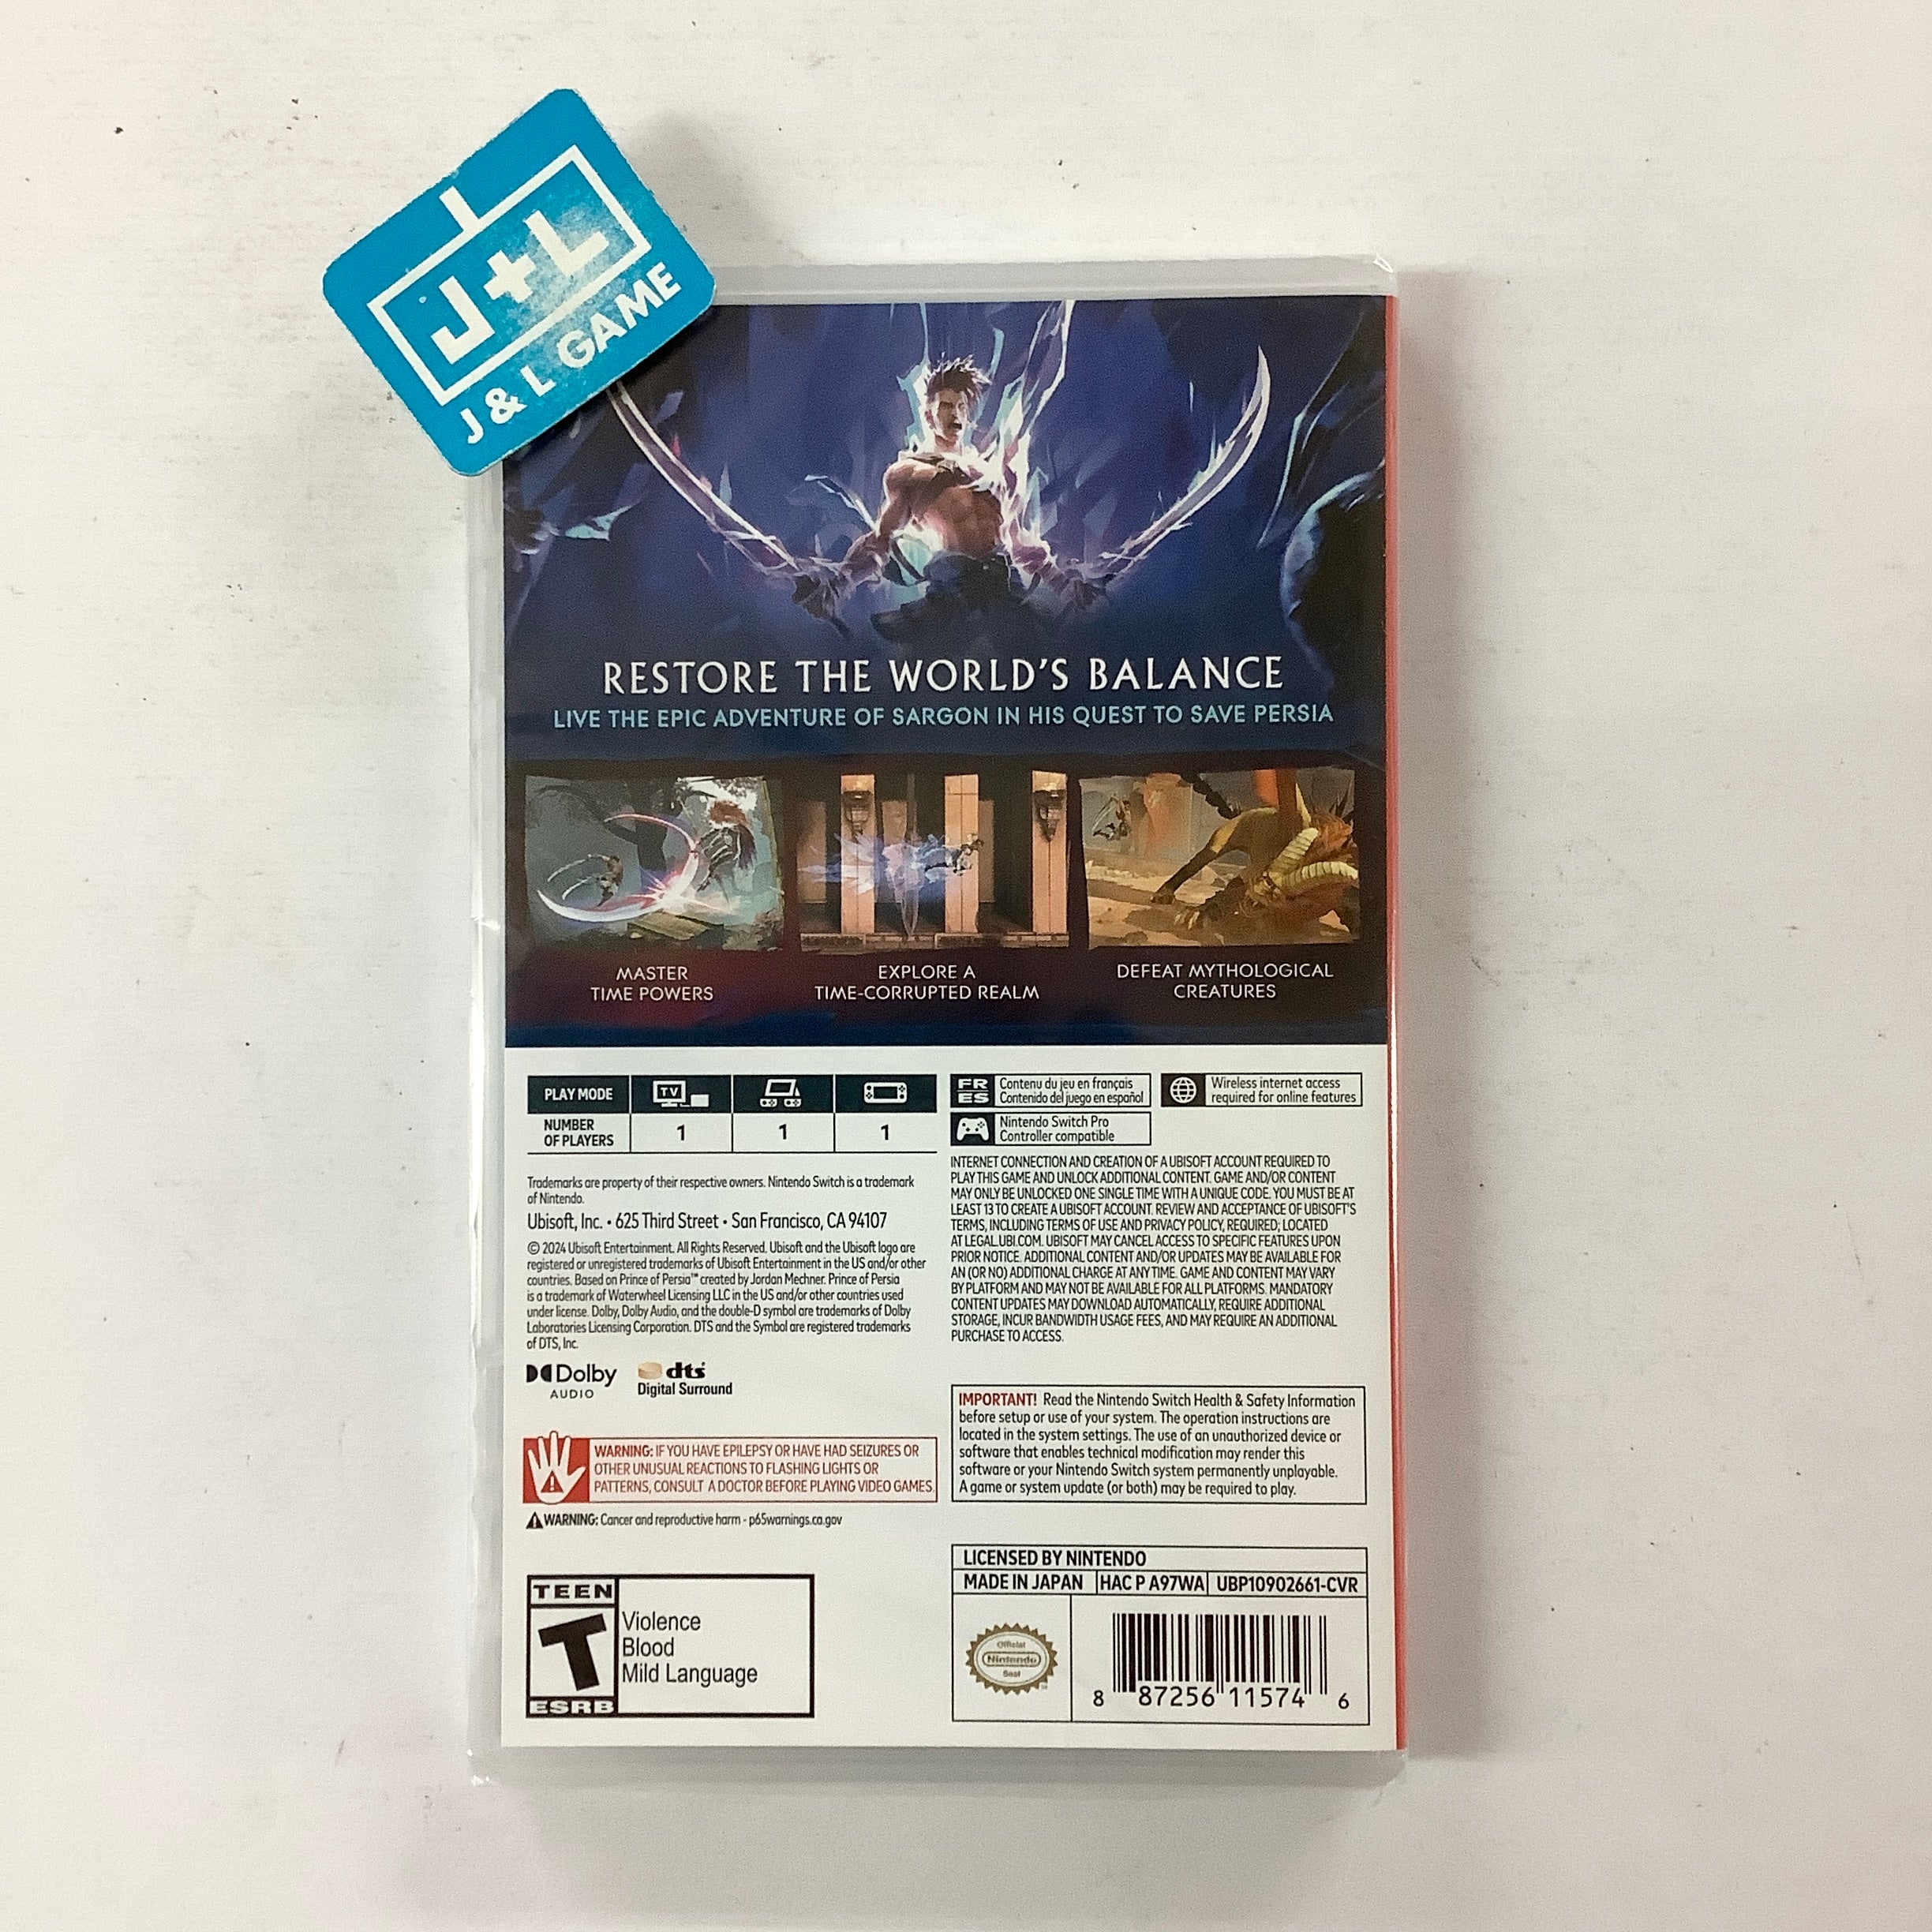 Prince of Persia: The Lost Crown - (NSW) Nintendo Switch Video Games Ubisoft   